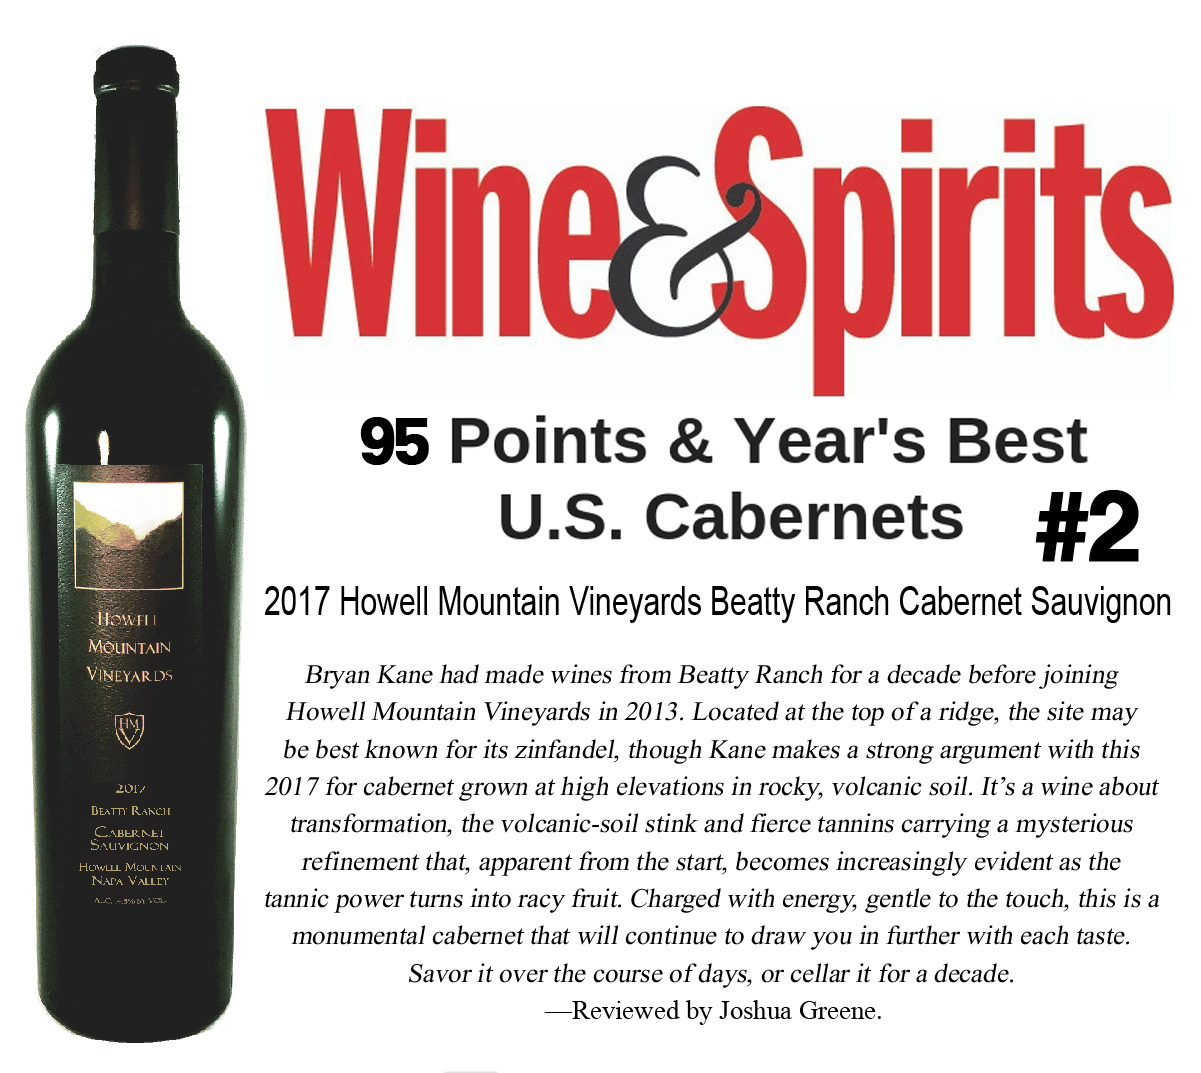 Wine & Sprits Magazine's #2 US Cabernet of the Year